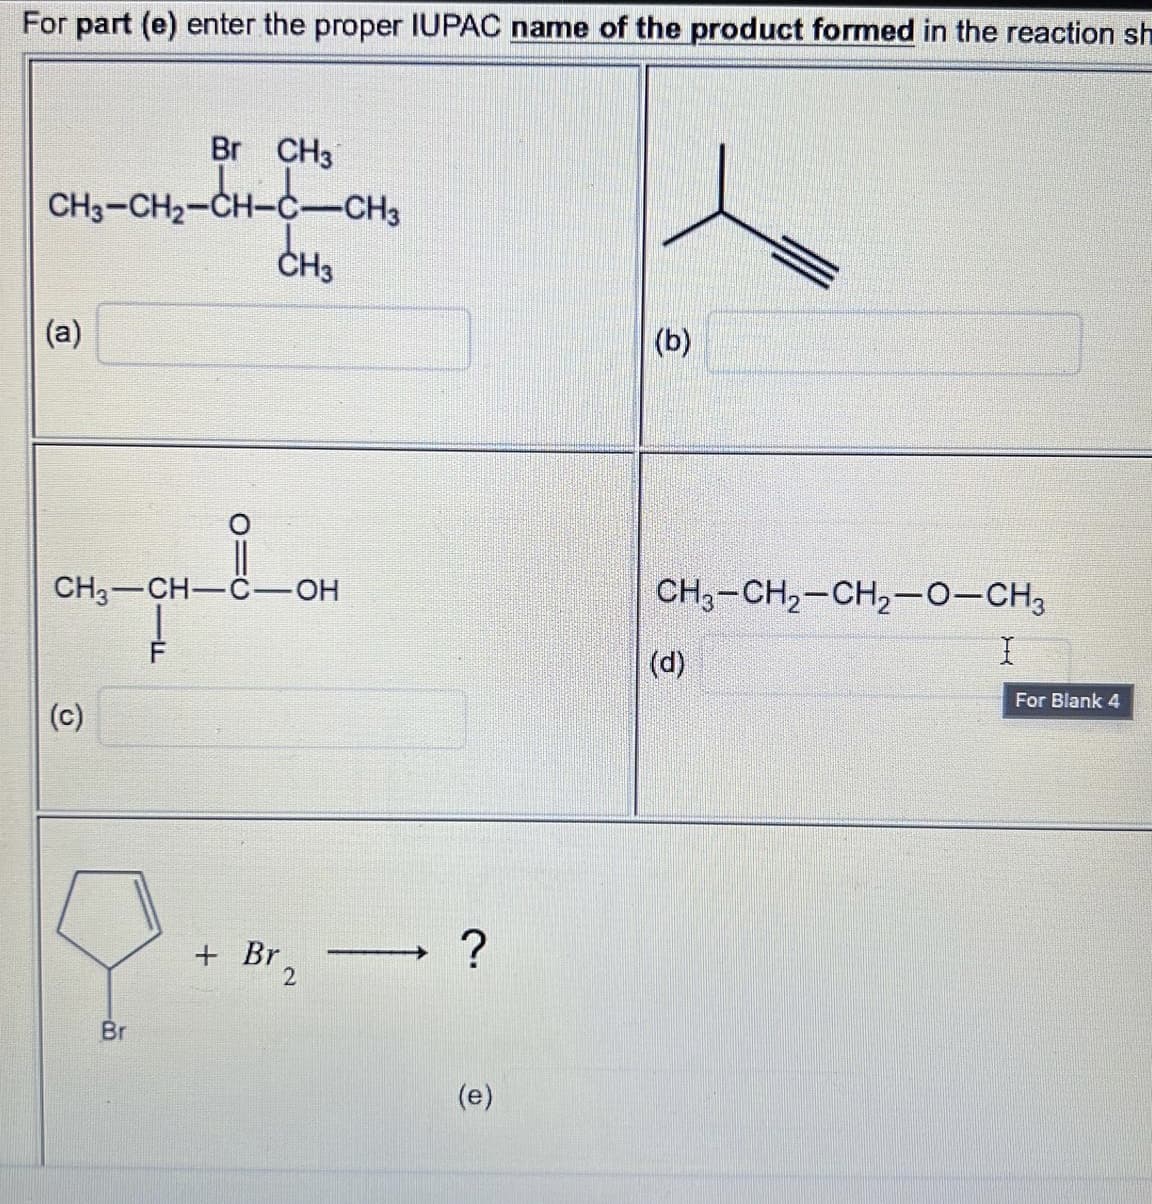 For part (e) enter the proper IUPAC name of the product formed in the reaction sh
Br CH3
CHO-CH-CH-CCHO
(a)
(c)
O=C
CH3-CH-C-OH
Br
CH3
+ Br
2
?
(e)
(b)
CH3-CH₂-CH₂-O-CH3
(d)
For Blank 4